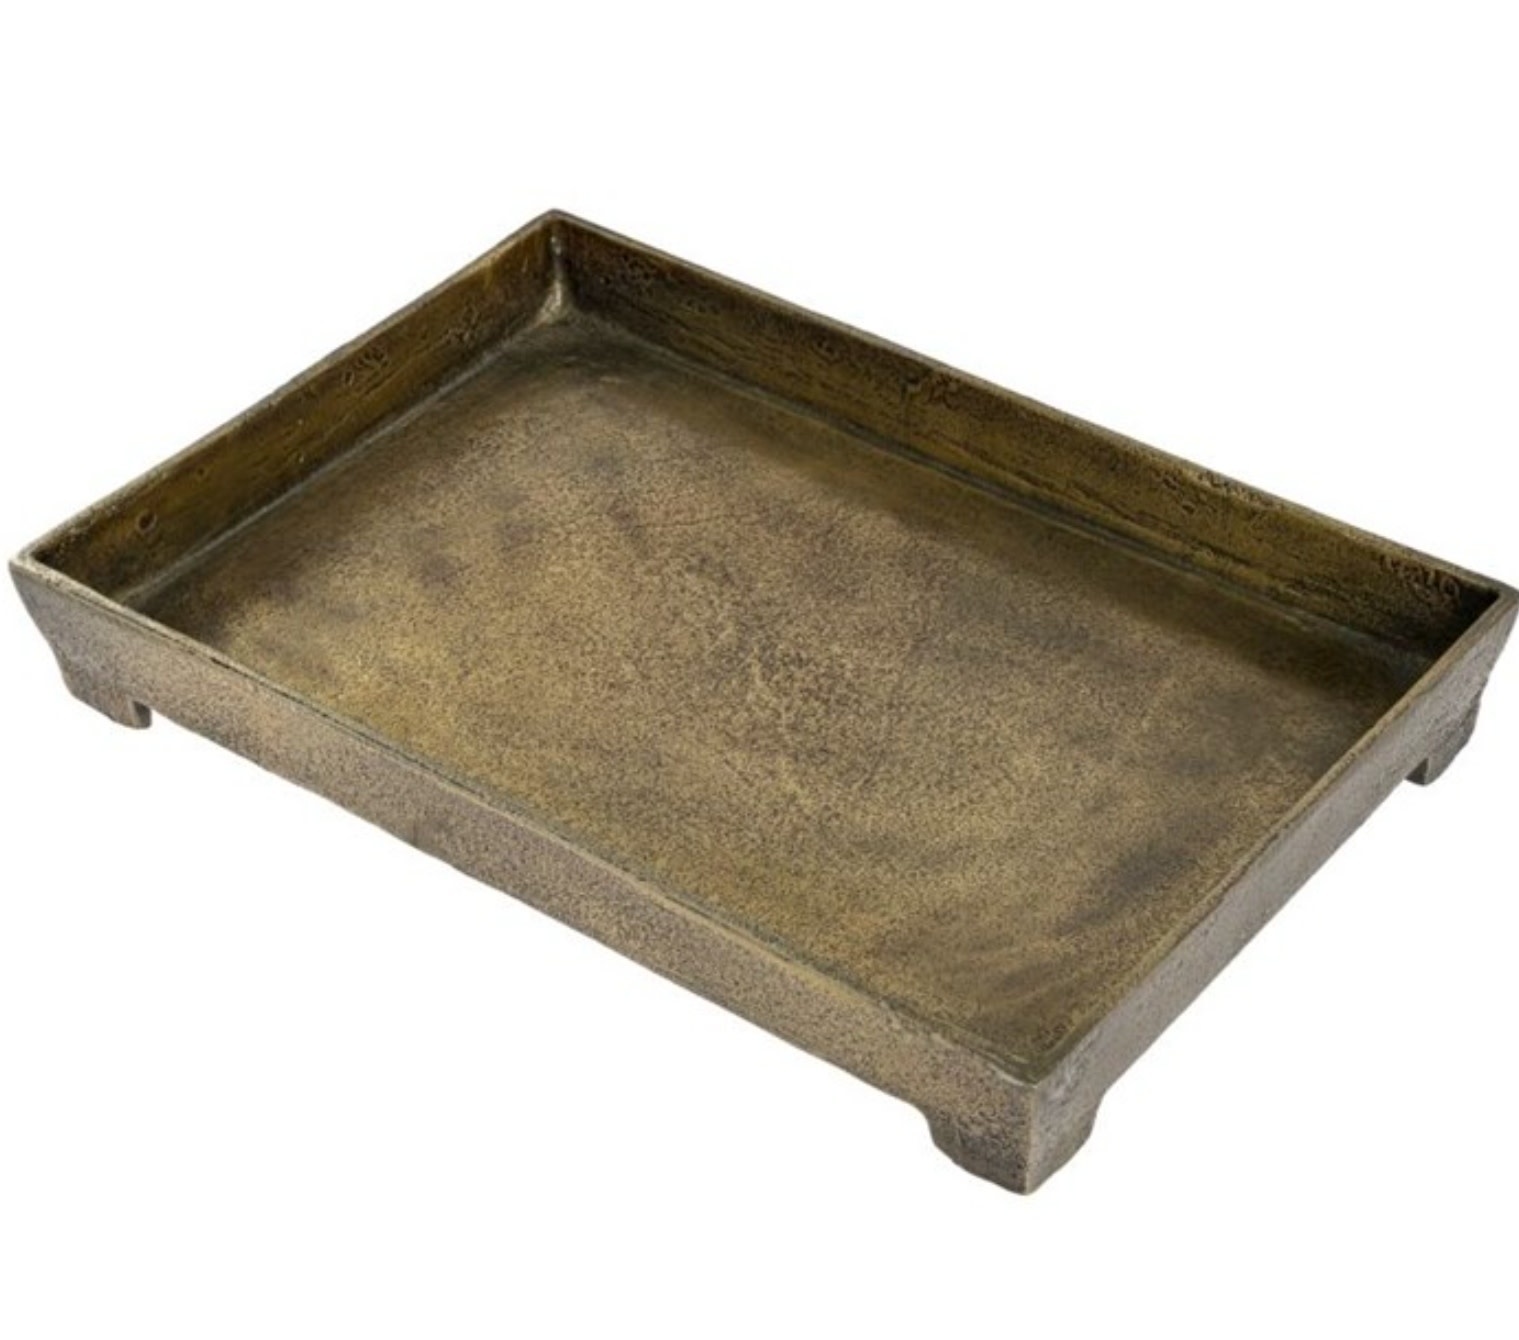 Footed Coffee Bronze Table Tray, 15.5x11"